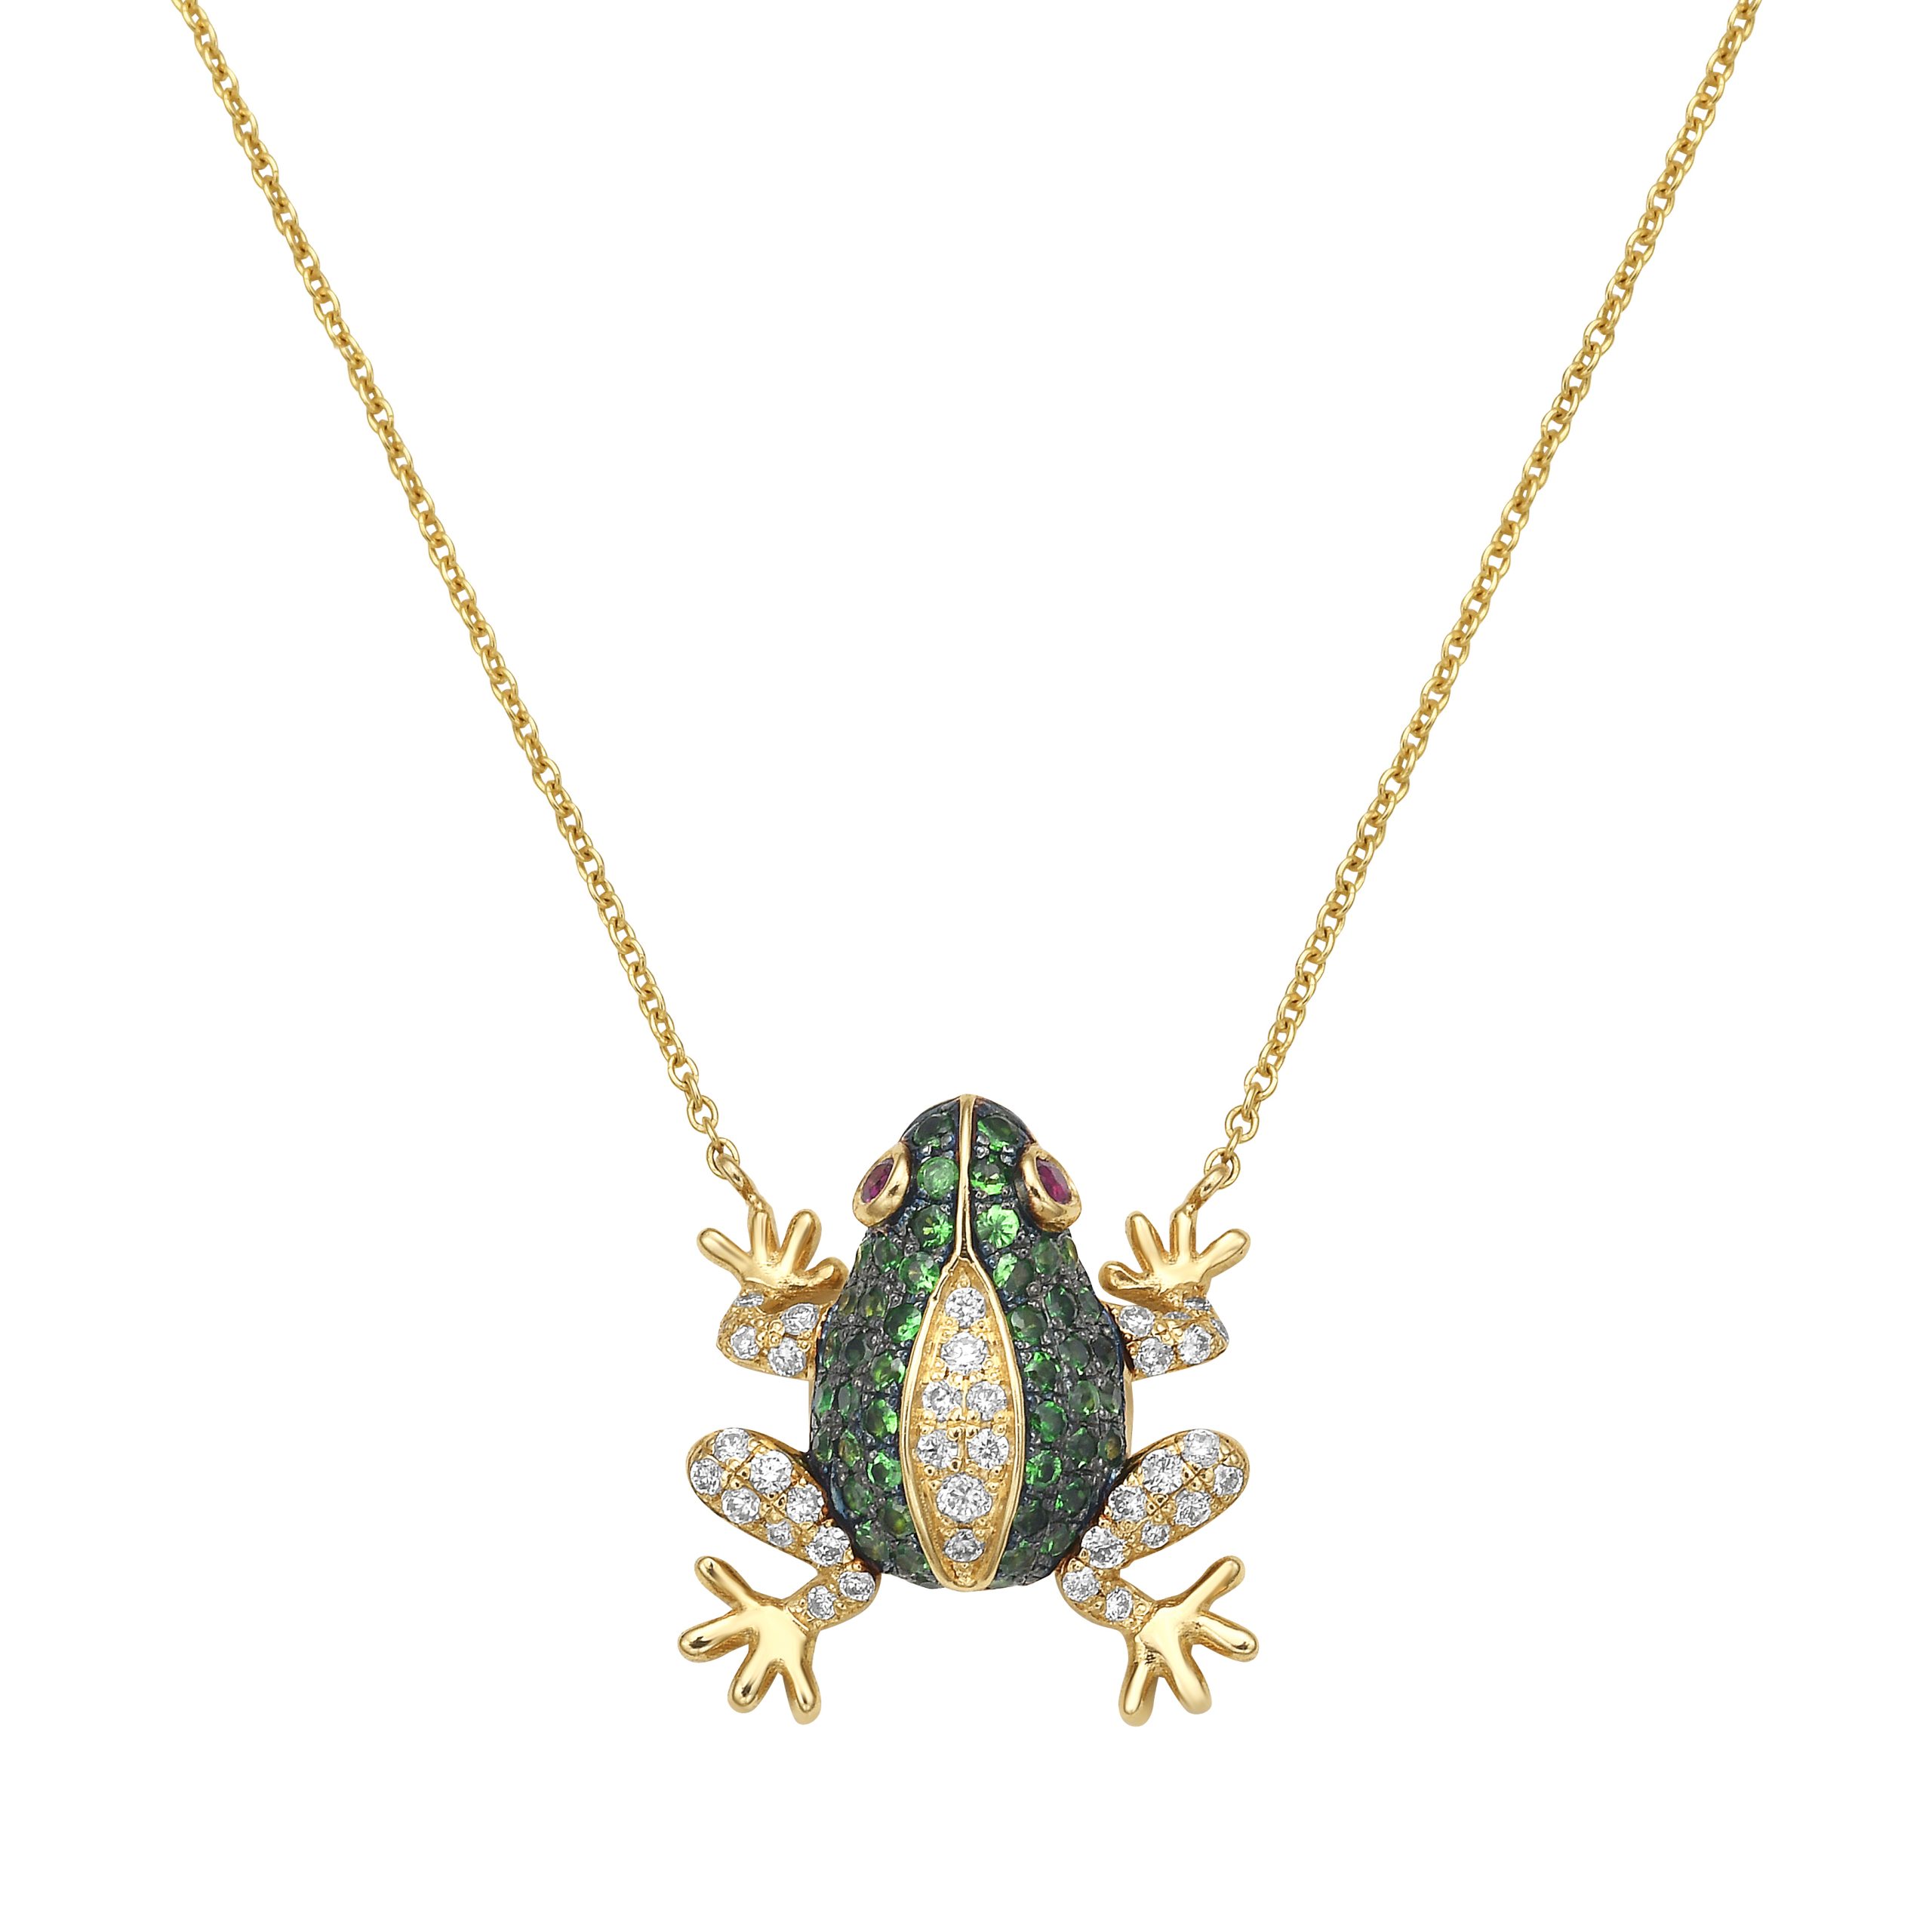 Bisou Tsavorite Lucky Frog Charm Necklace